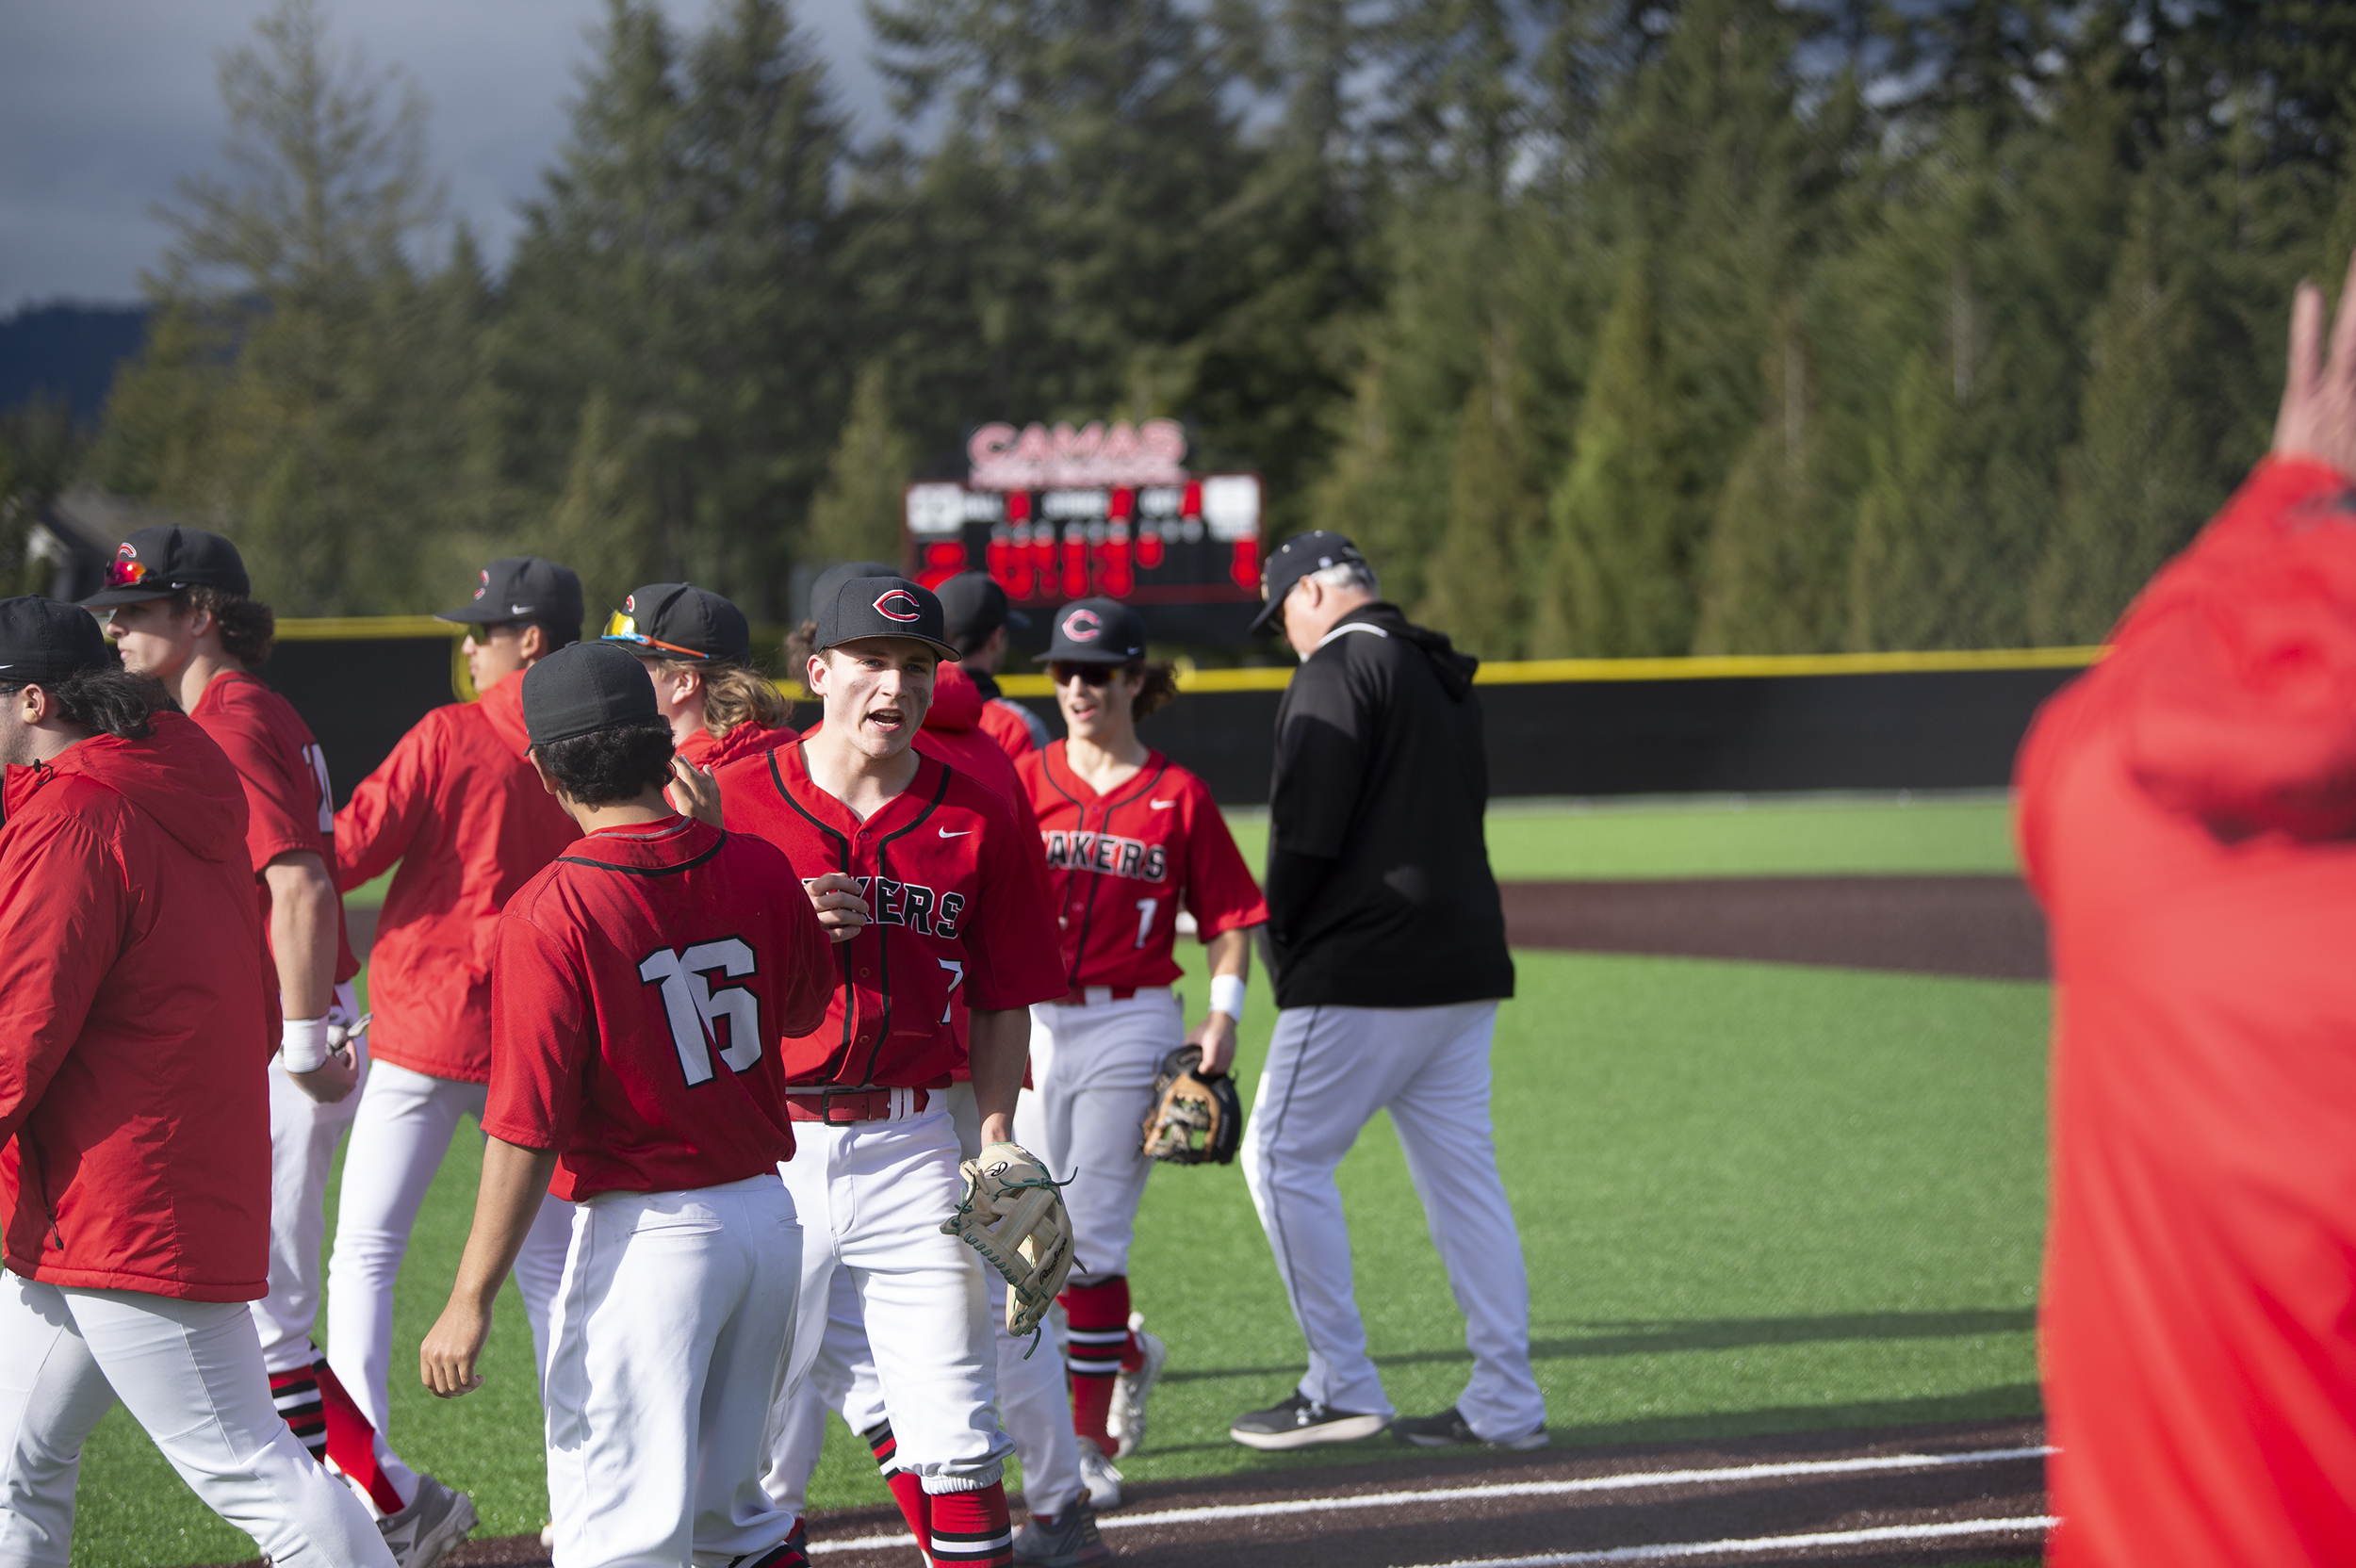 Drew Hancock celebrates with his teammates after the Camas Papermakers beat Sumner 9-3 in a 4A bi-district baseball game at Camas on Saturday, May 7, 2022.